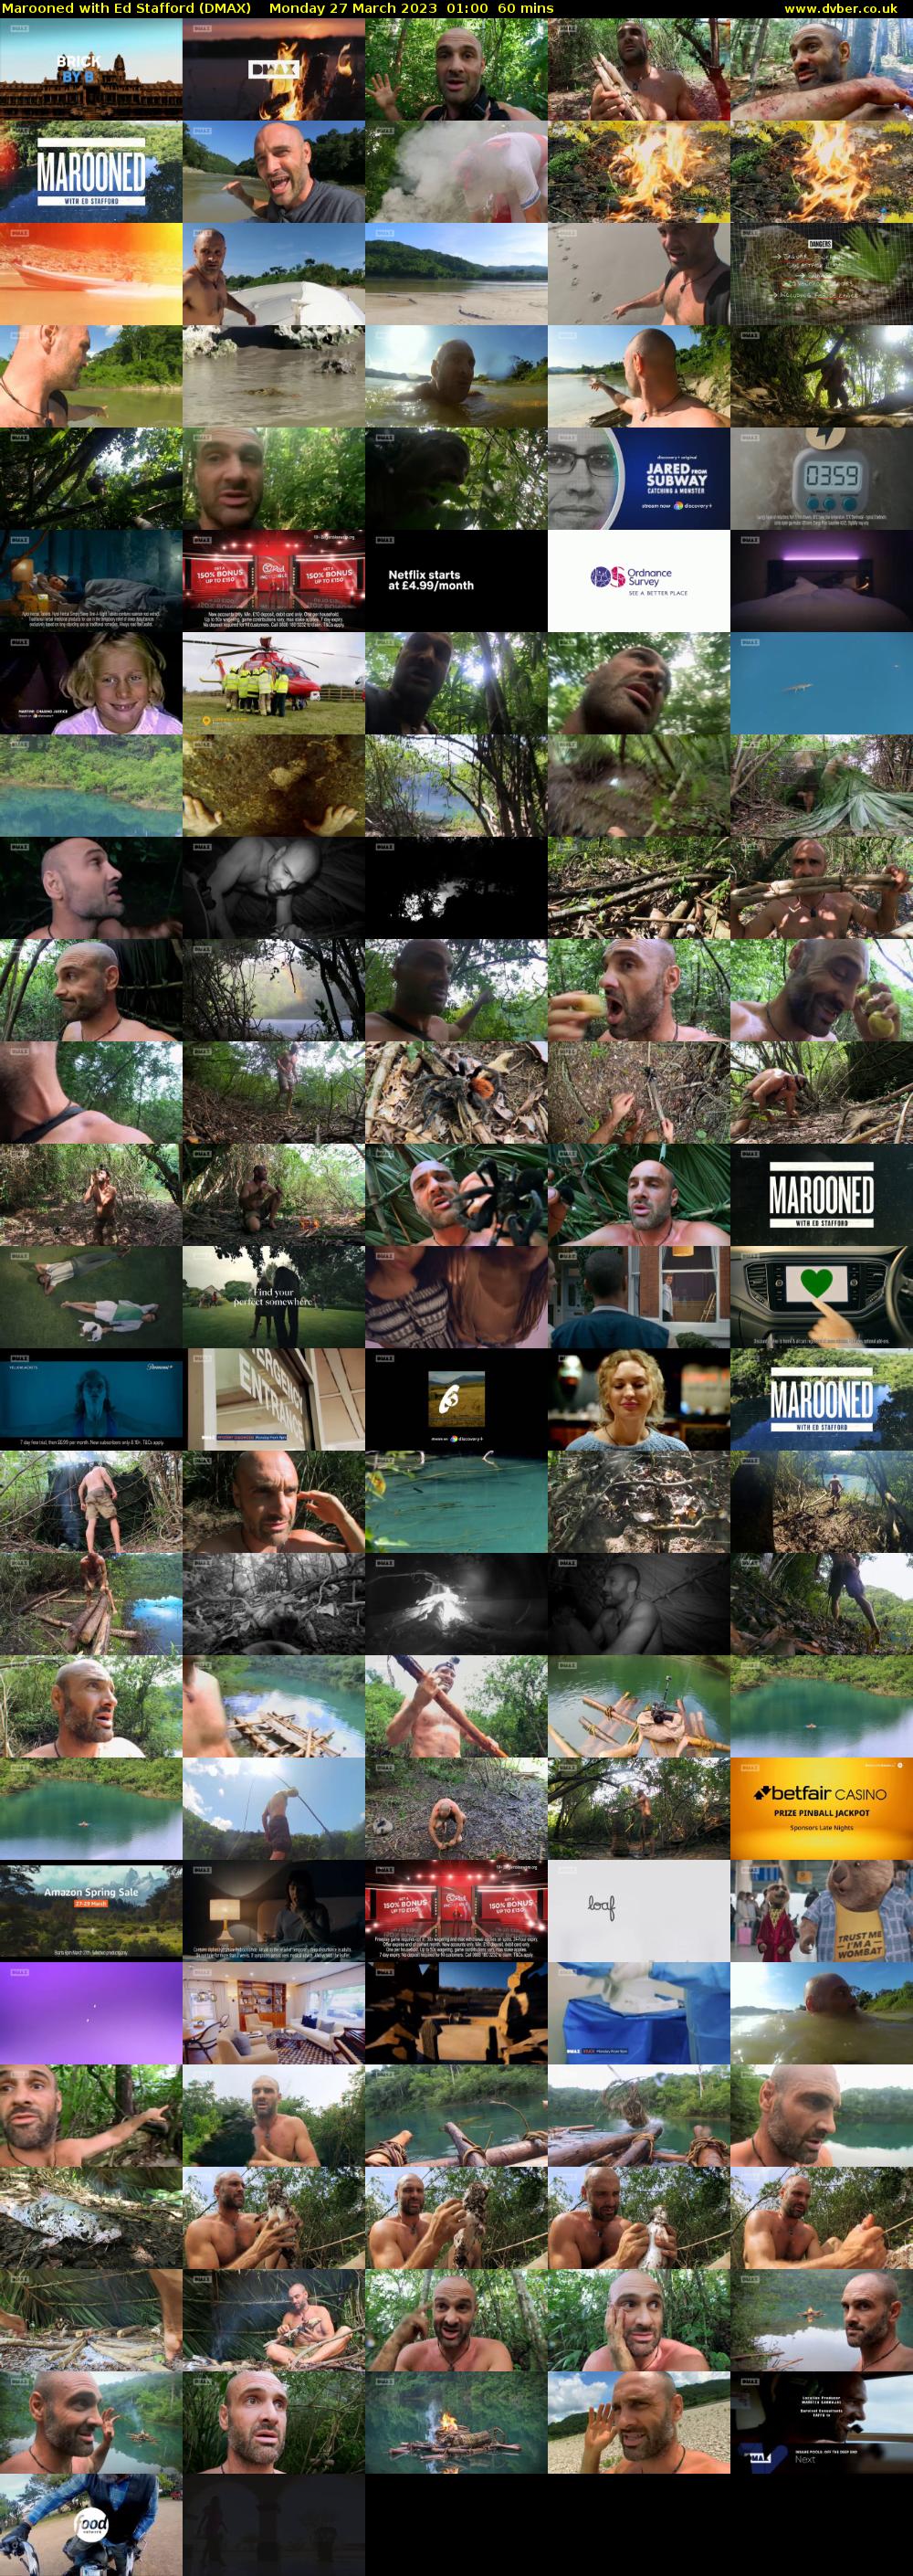 Marooned with Ed Stafford (DMAX) Monday 27 March 2023 01:00 - 02:00